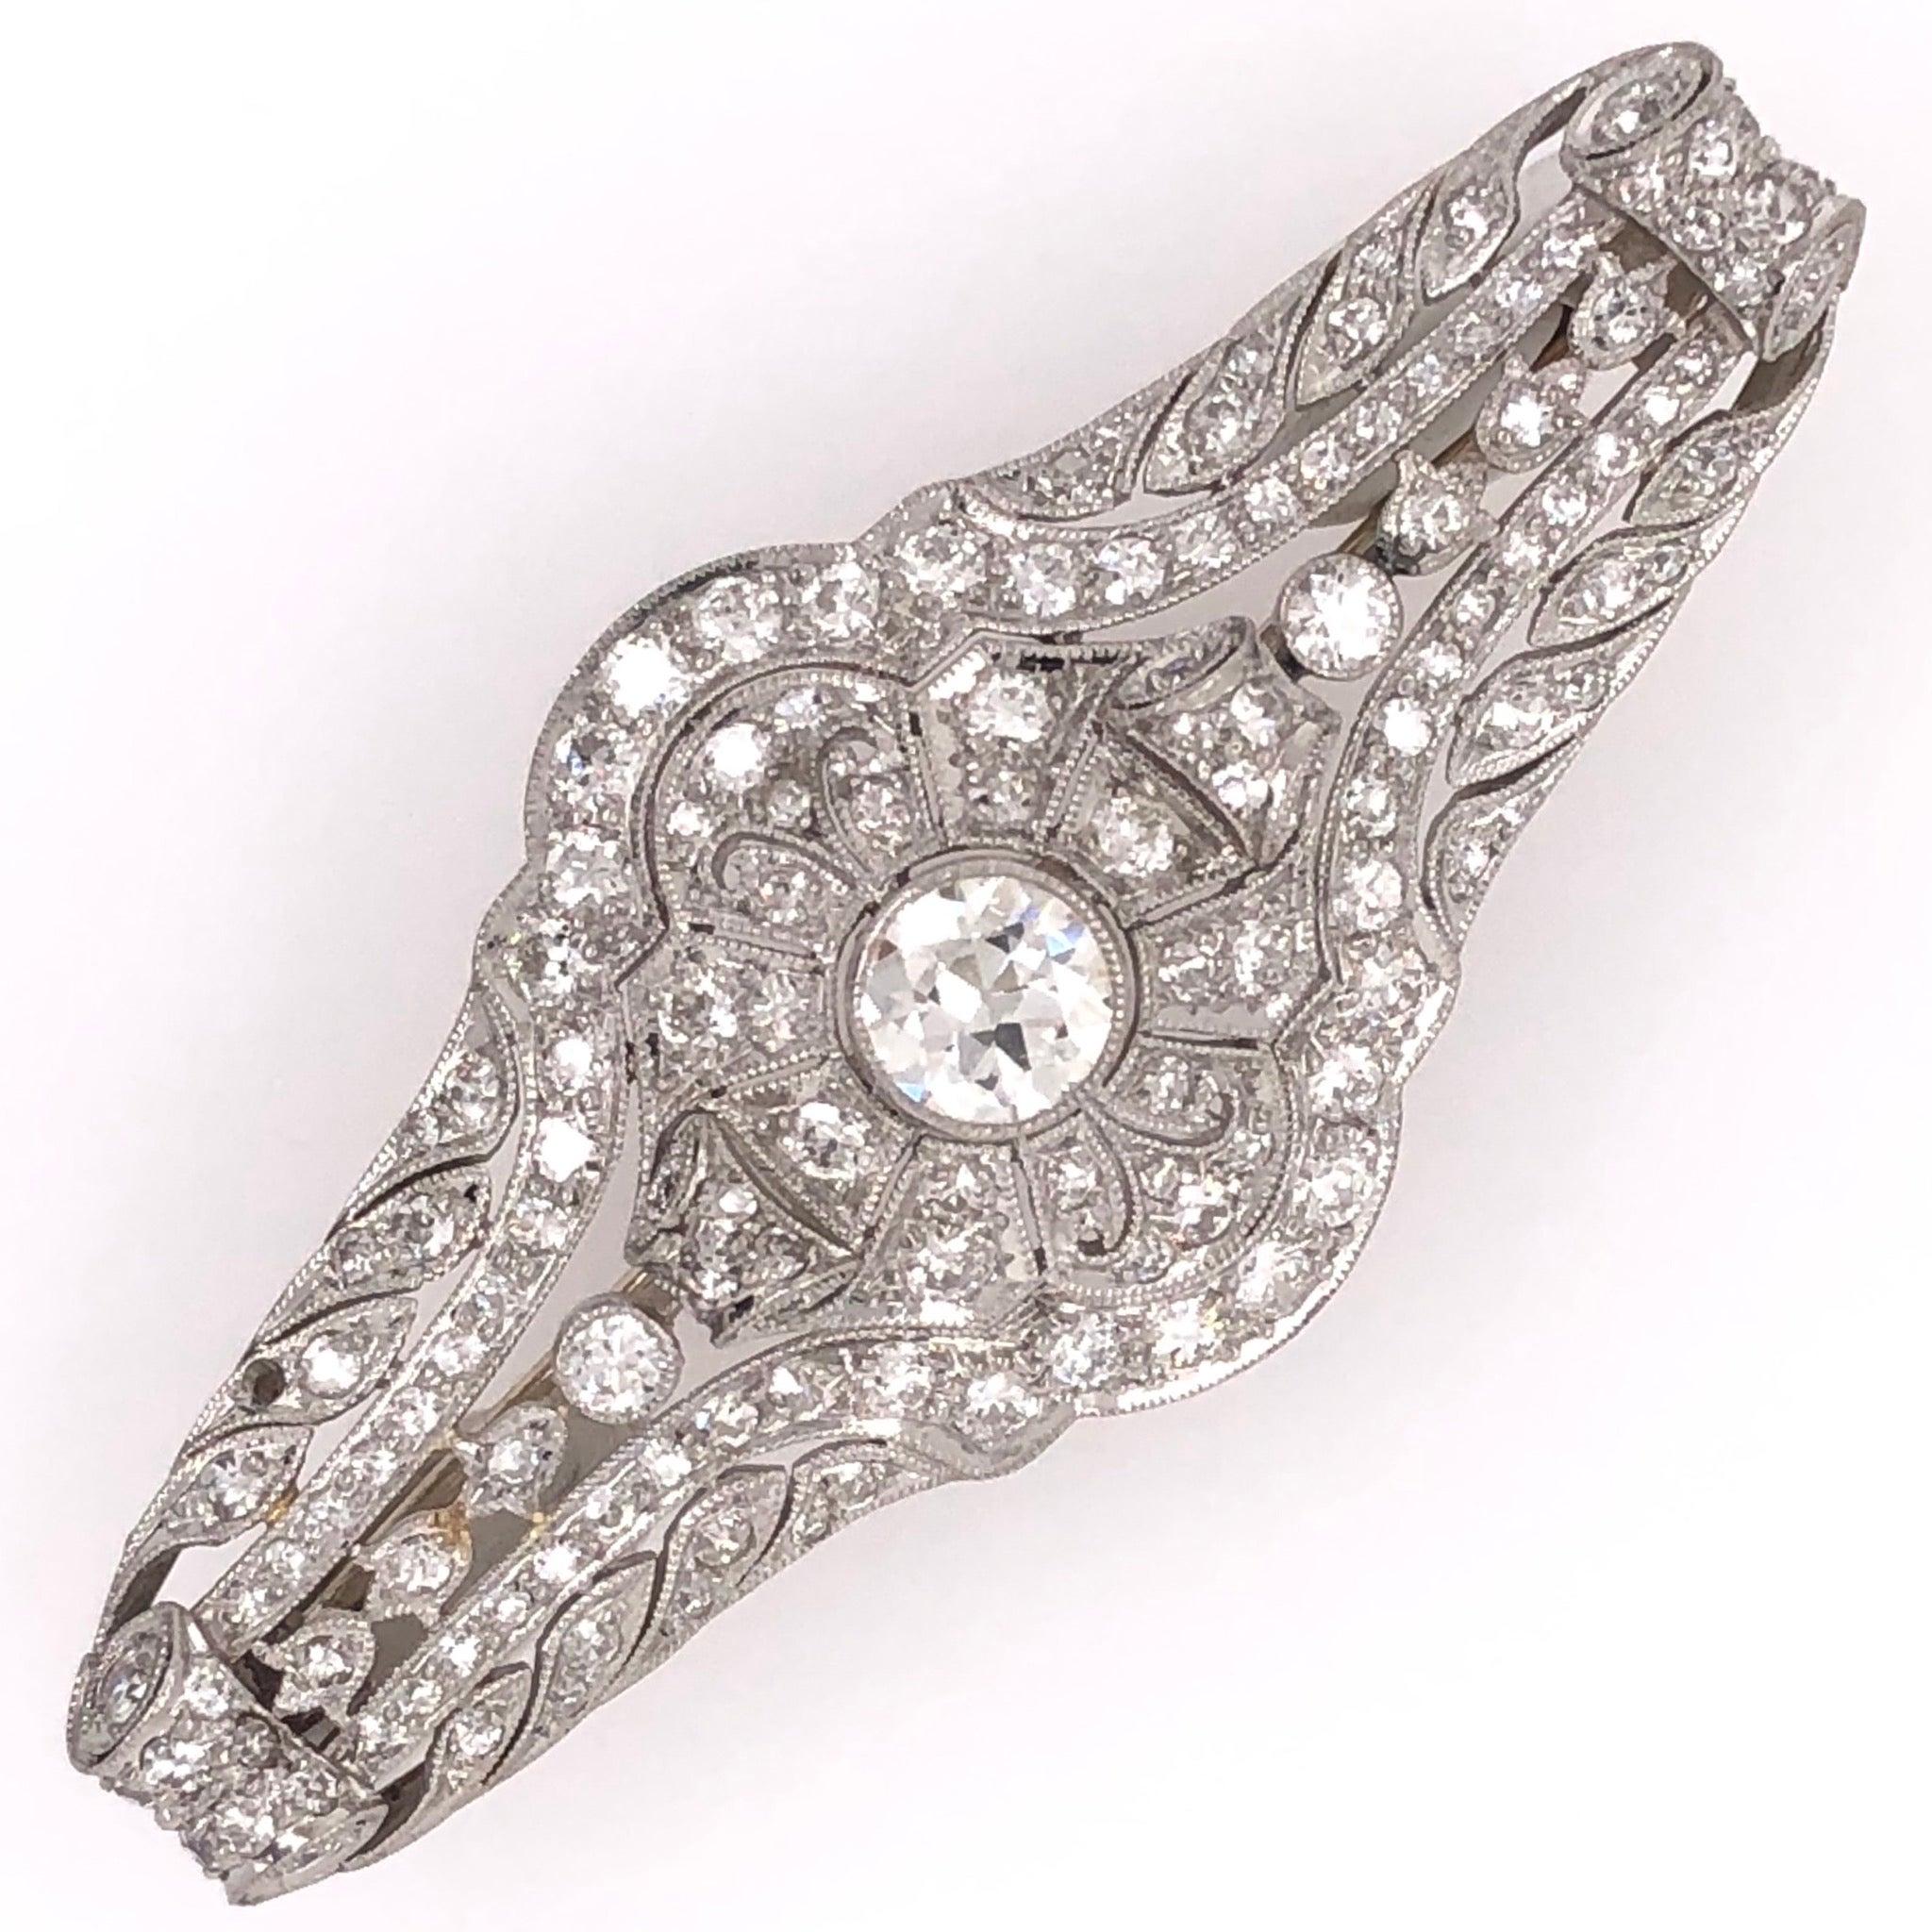 Vintage Diamond Art Deco Platinum Filigree Brooch Pin Estate Fine Jewelry In Excellent Condition For Sale In Montreal, QC